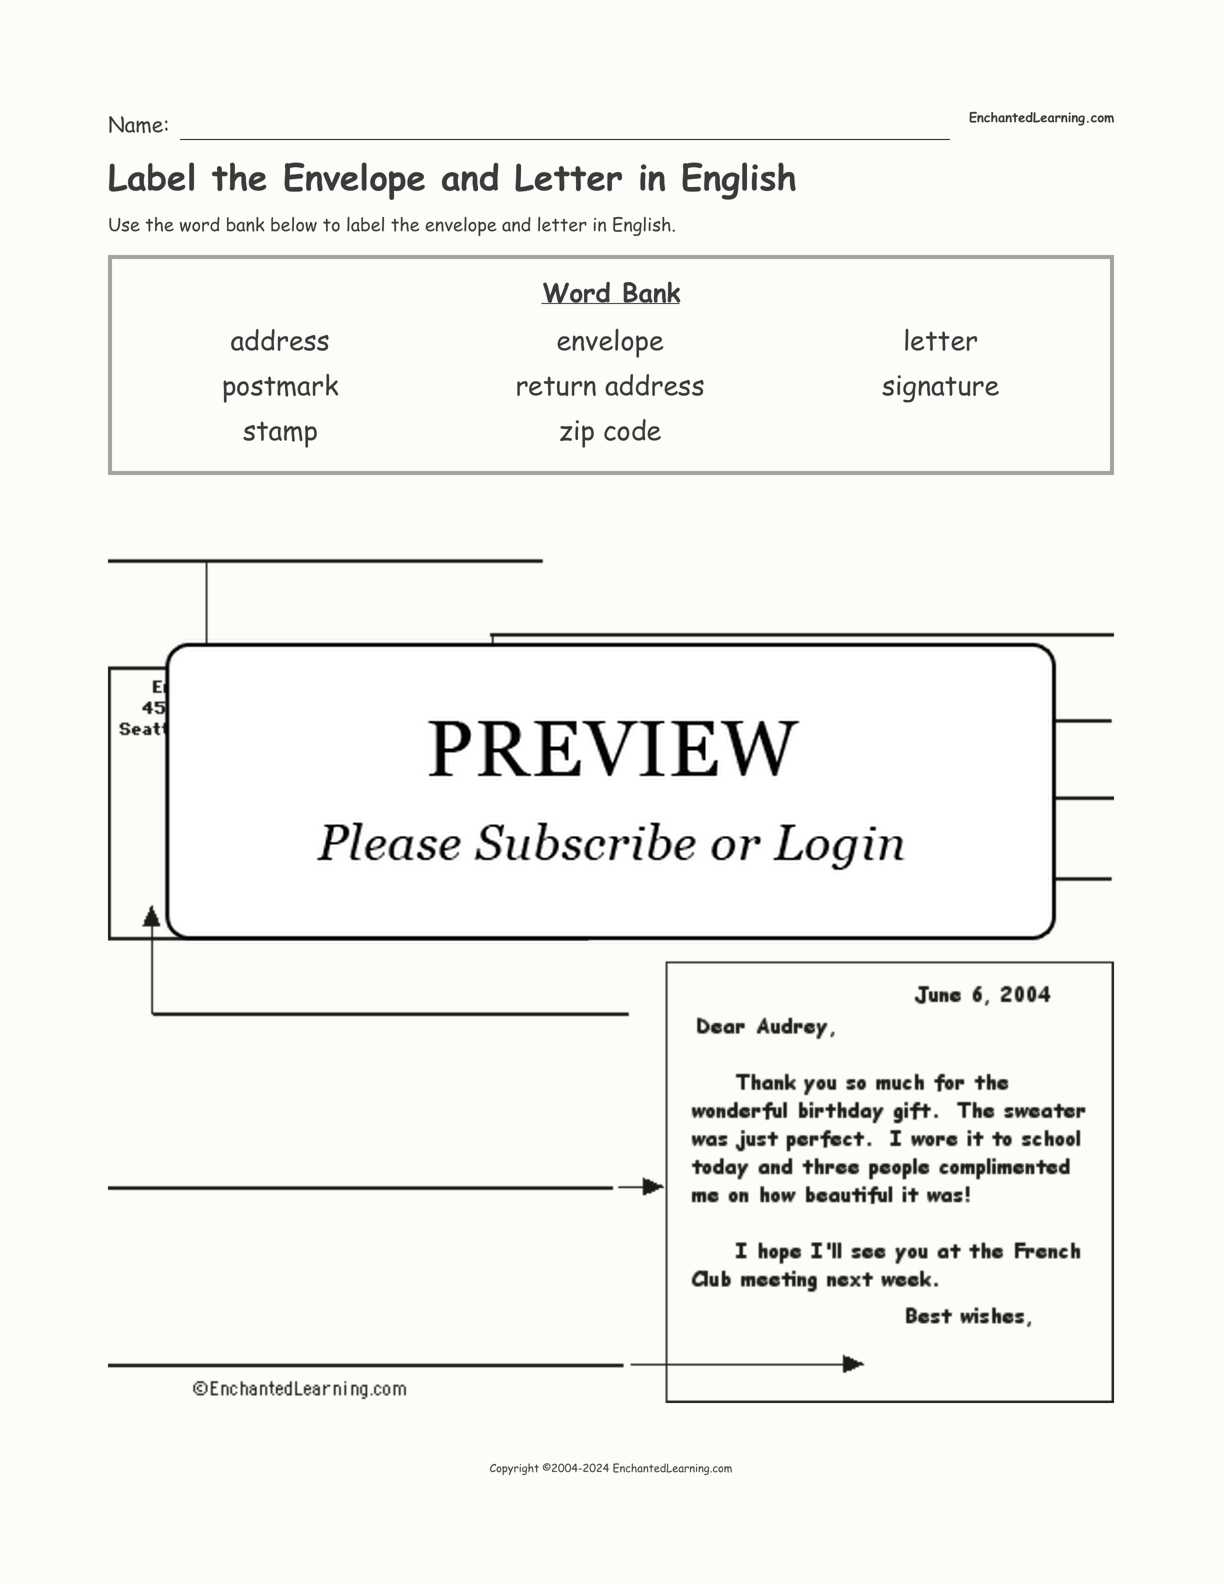 Label the Envelope and Letter in English interactive worksheet page 1